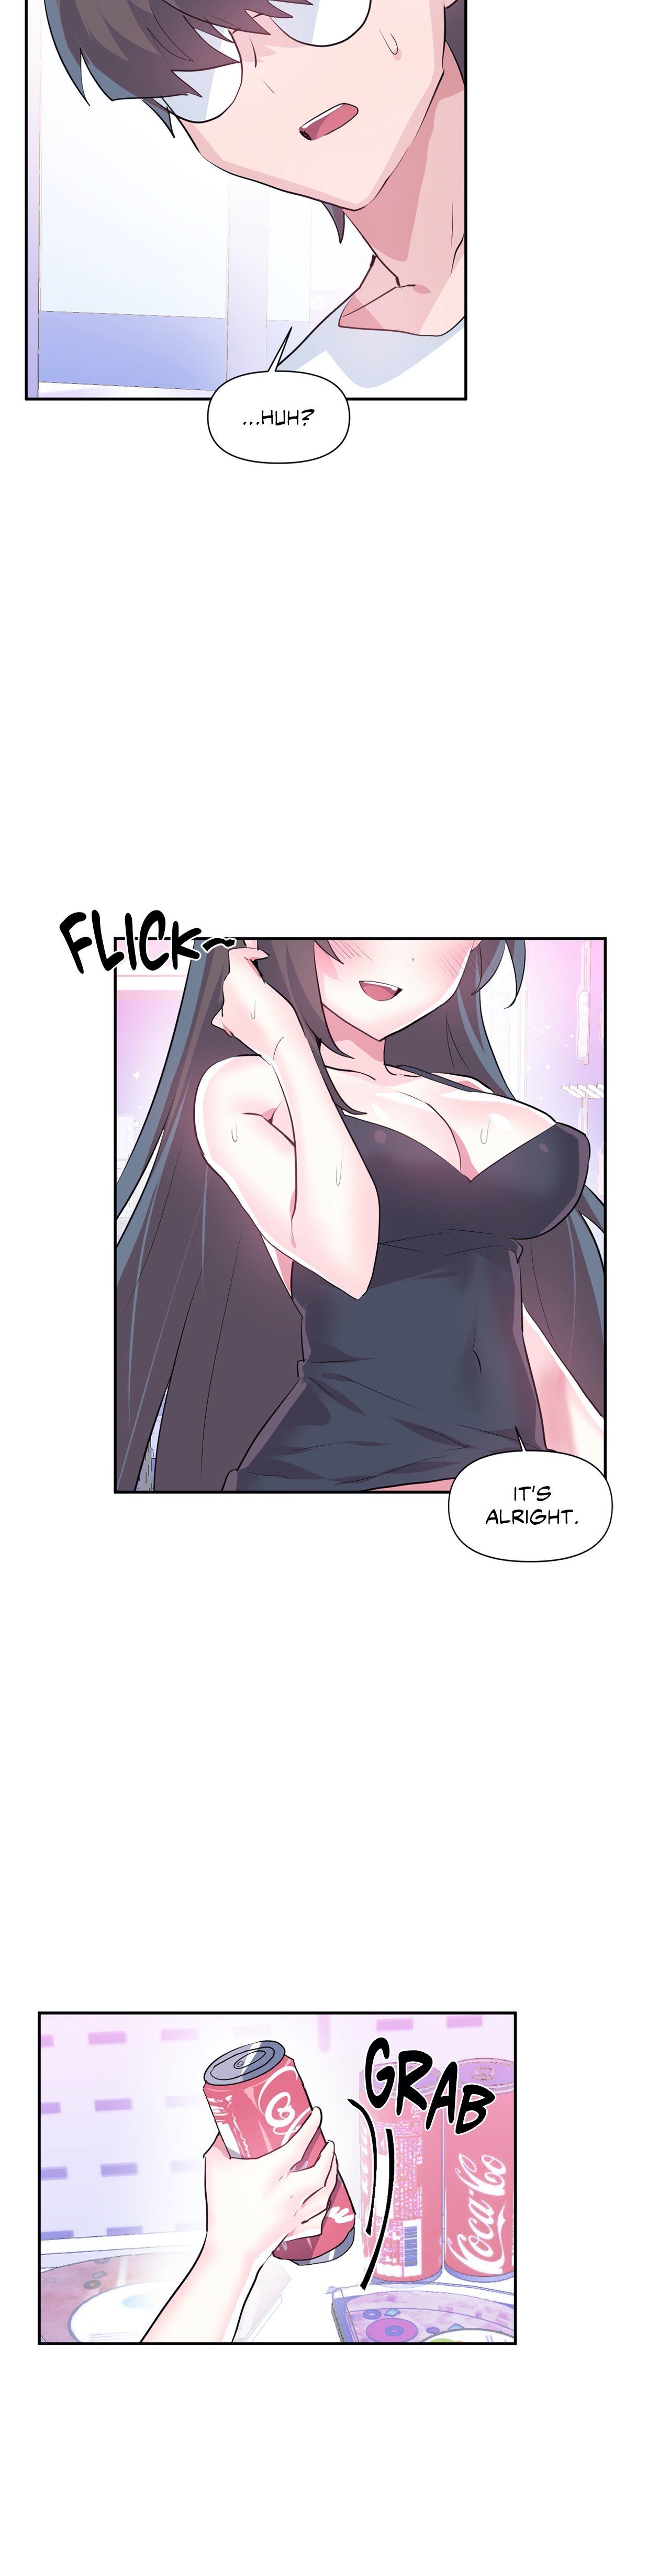 log-in-to-lust-a-land-chap-33-7